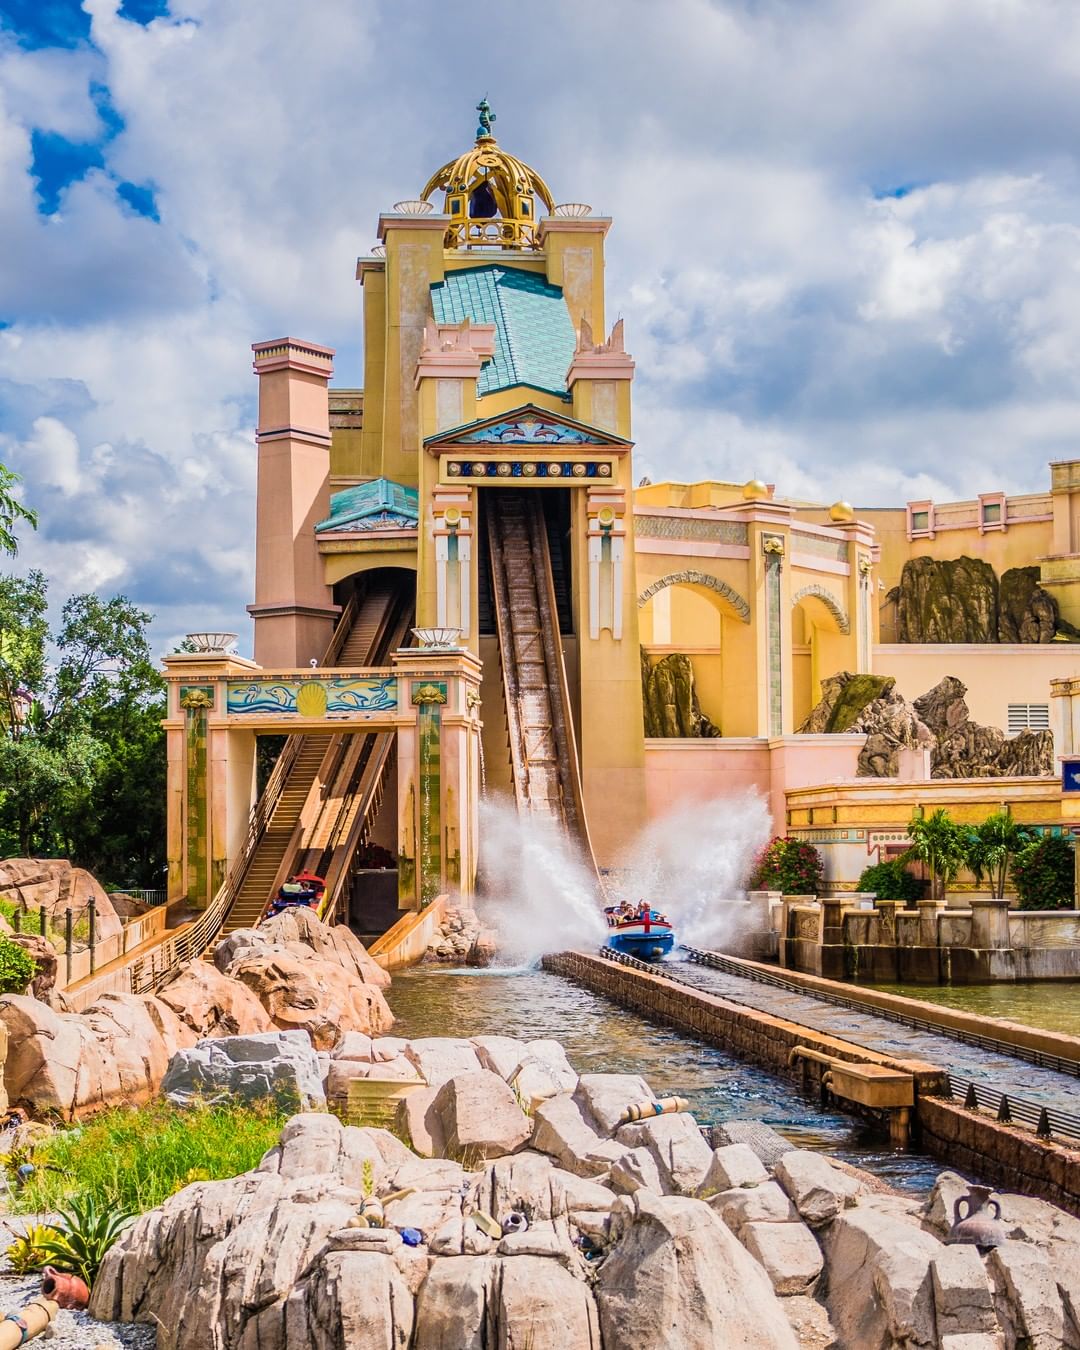 Journey to Atlantis - Attraction That Waters at SeaWorld Orlando